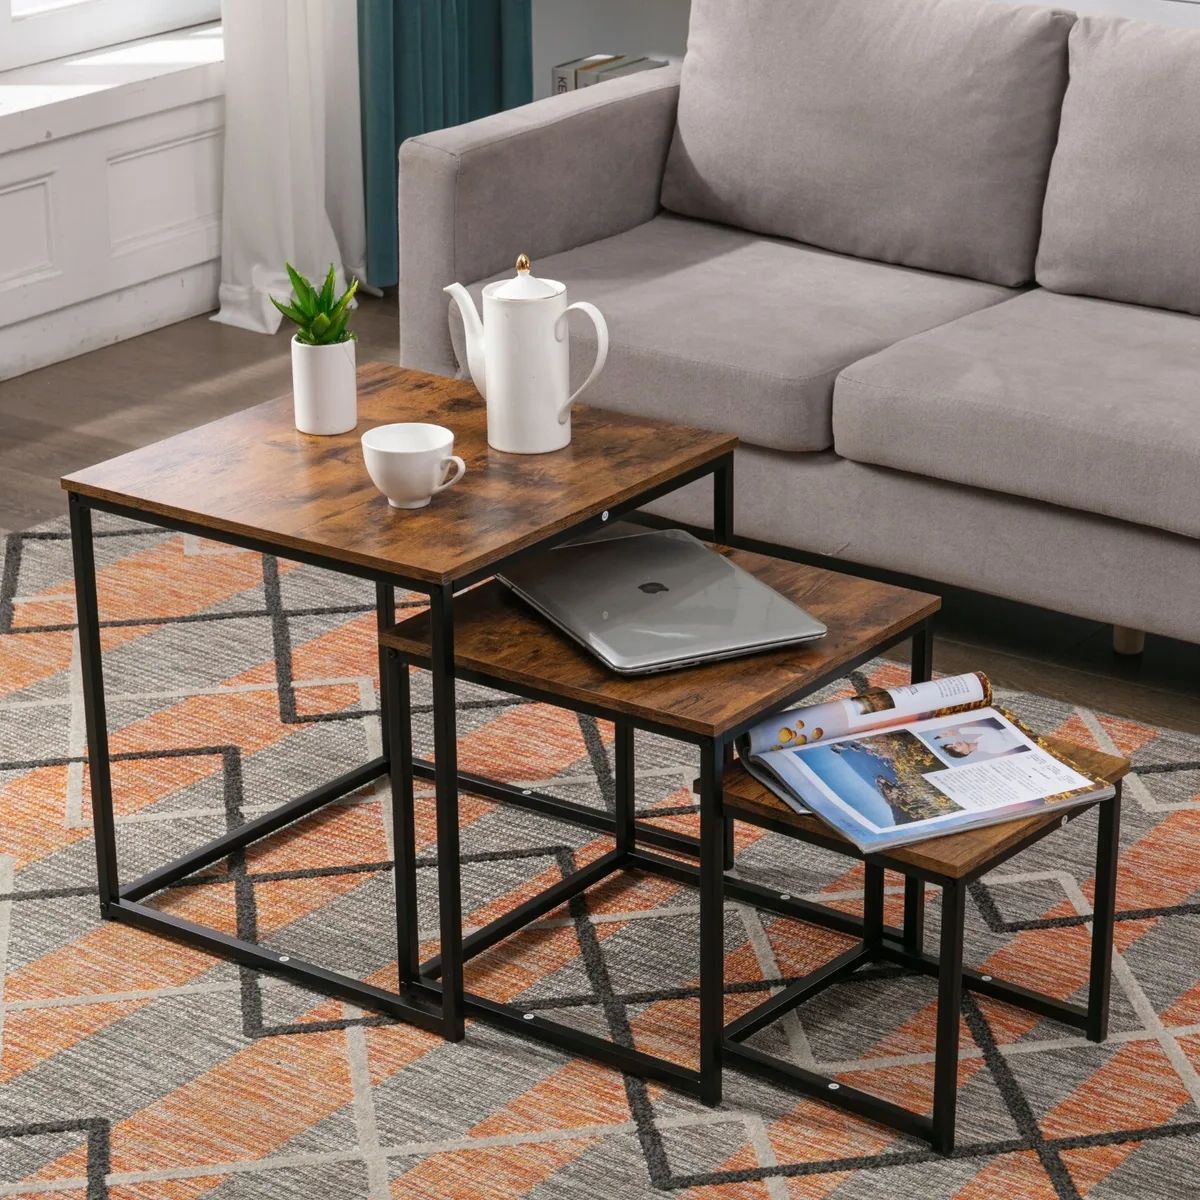 Newest Coffee Tables Of 3 Nesting Tables Pertaining To Nest Coffee Table 3 In 1 Set Compact Modern Design For Space Saving For Any  Room (View 10 of 10)